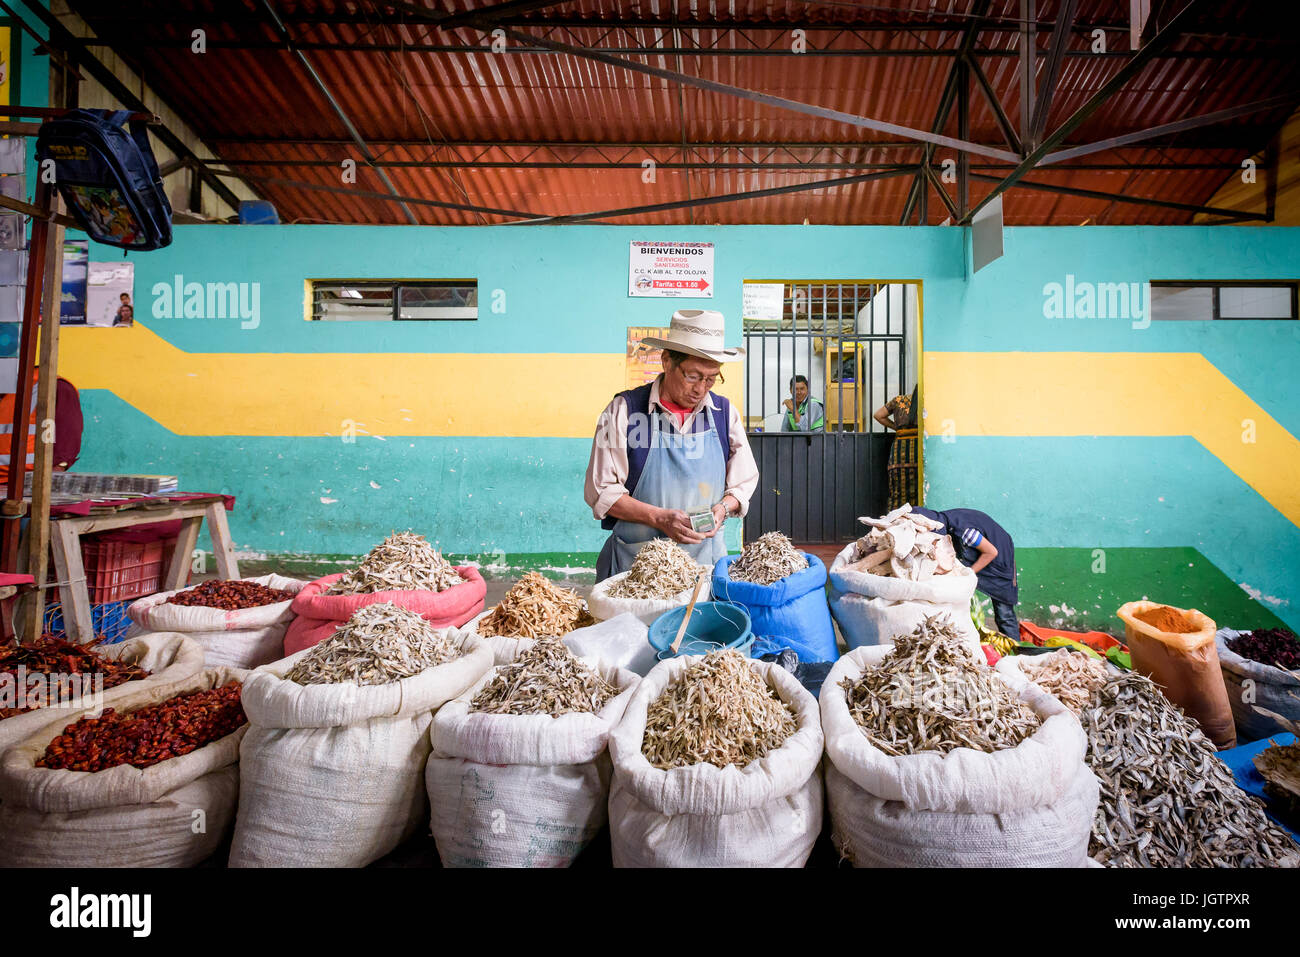 A man counting money inside the main food market (meat, dried fish and vegetable) in Chichicastenango, Guatemala Stock Photo